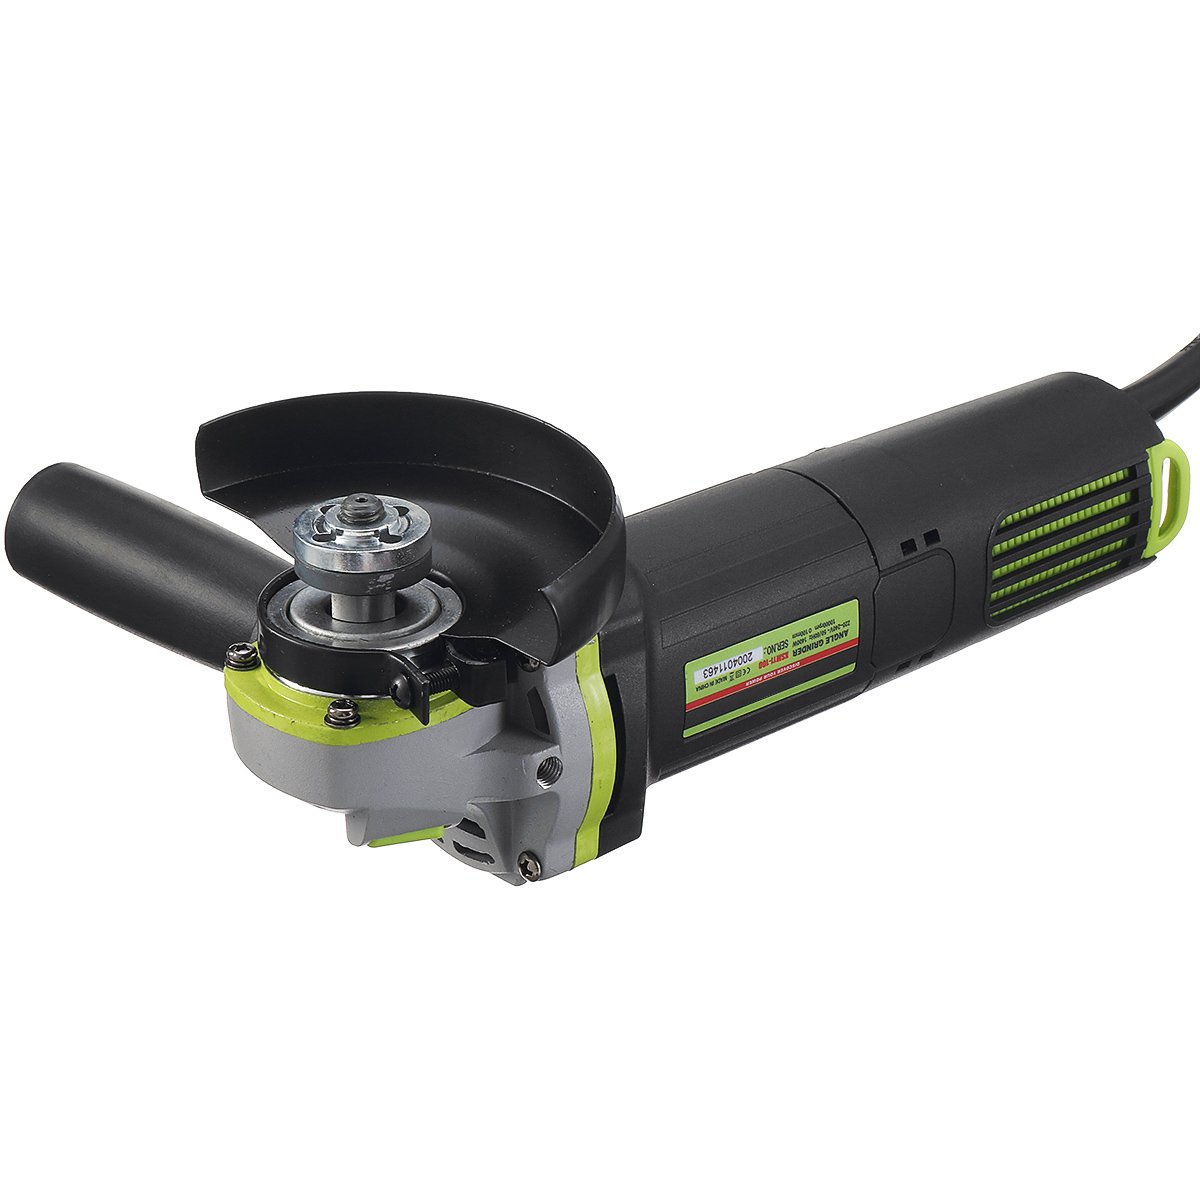 1400W-Professional-Corded-Angle-Grinder-100mm-Grinding-Cutting-Tool-10000RPM-1681930